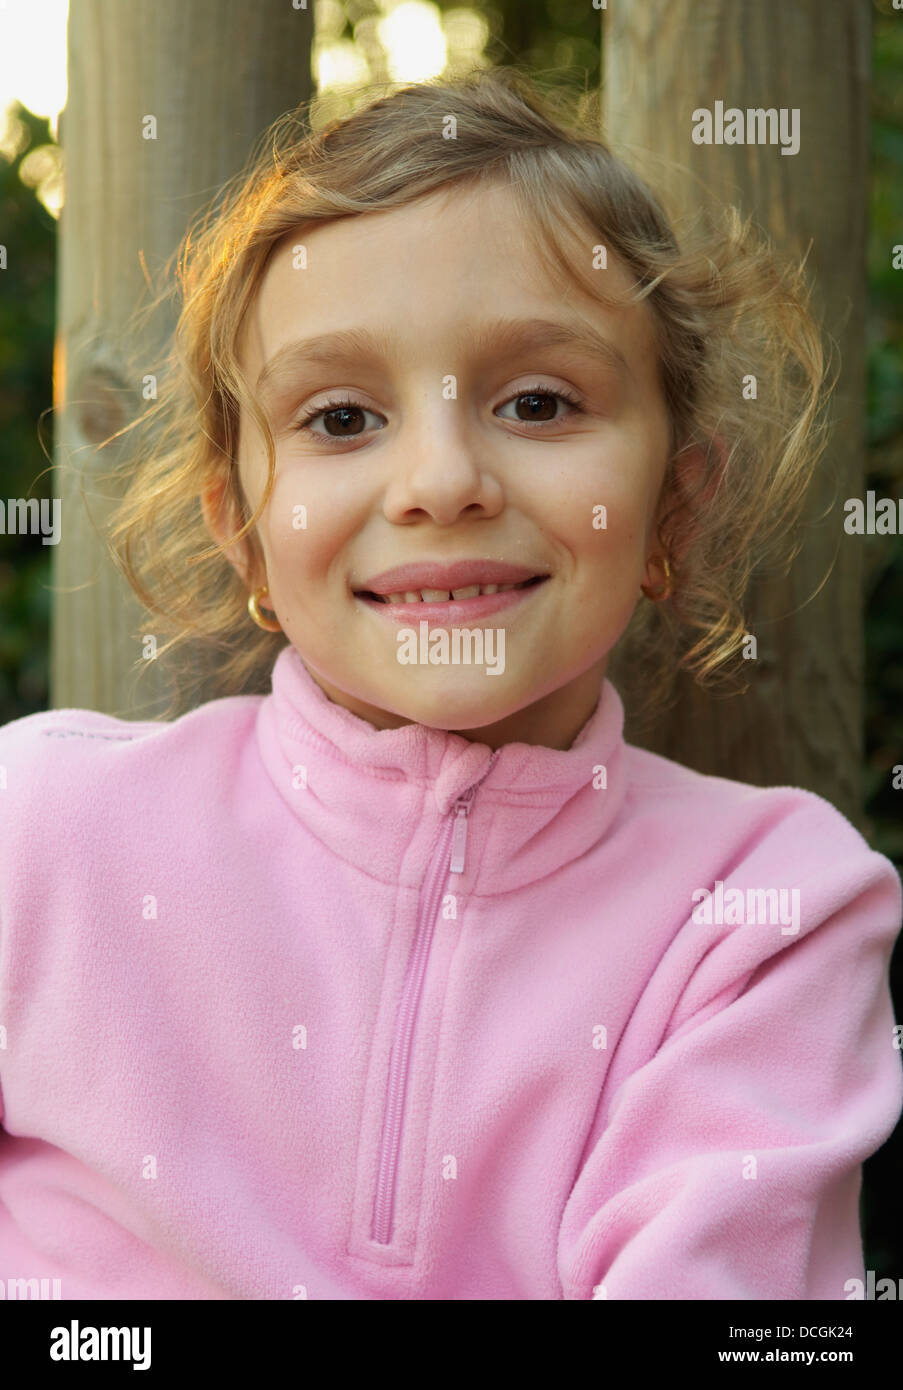 Portrait Of Girl Smiling Outdoors Stock Photo